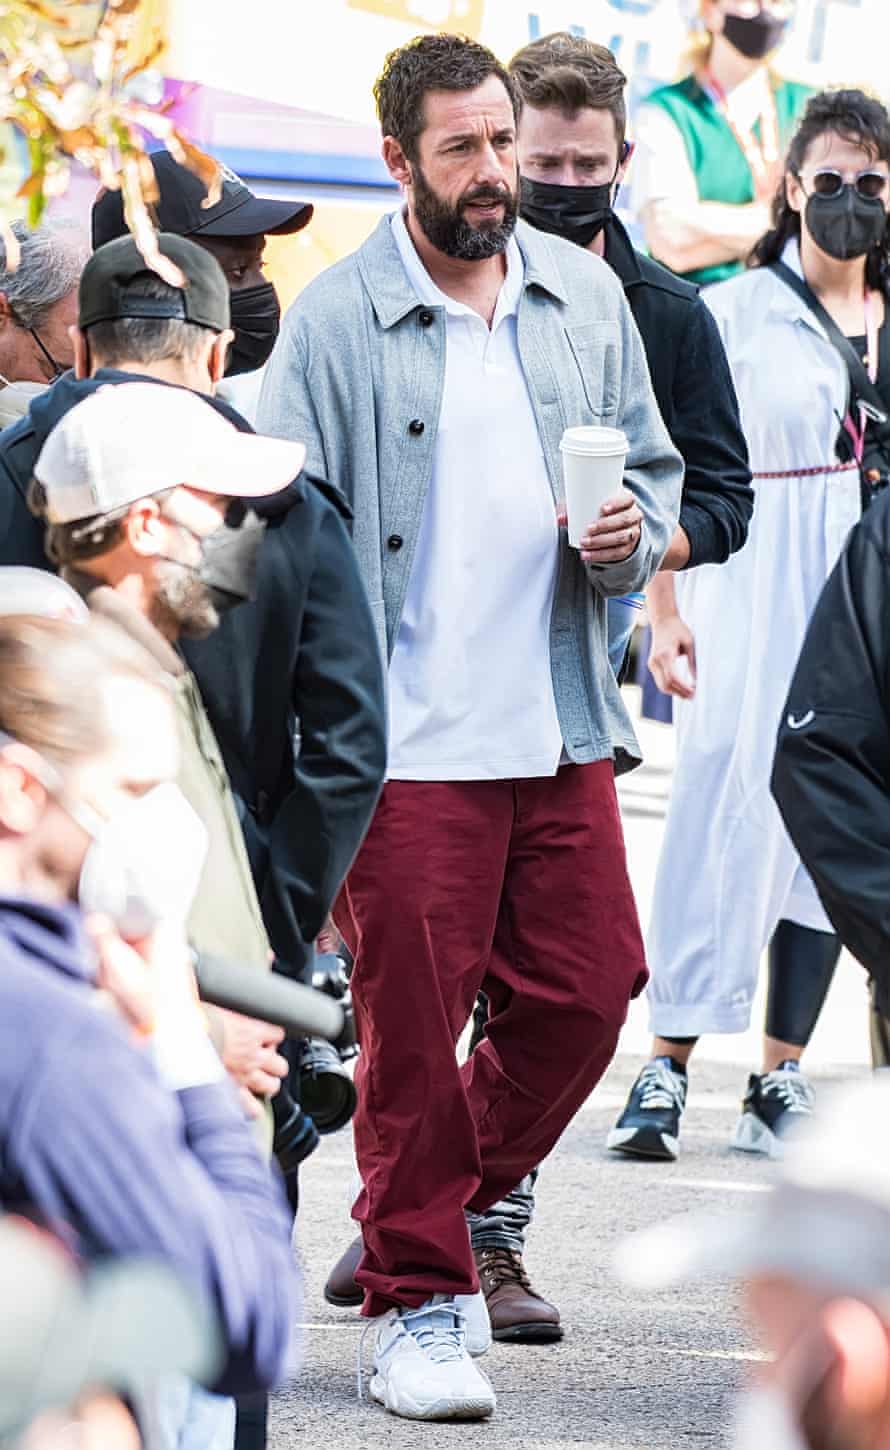 Sandler in his signature effortless style.